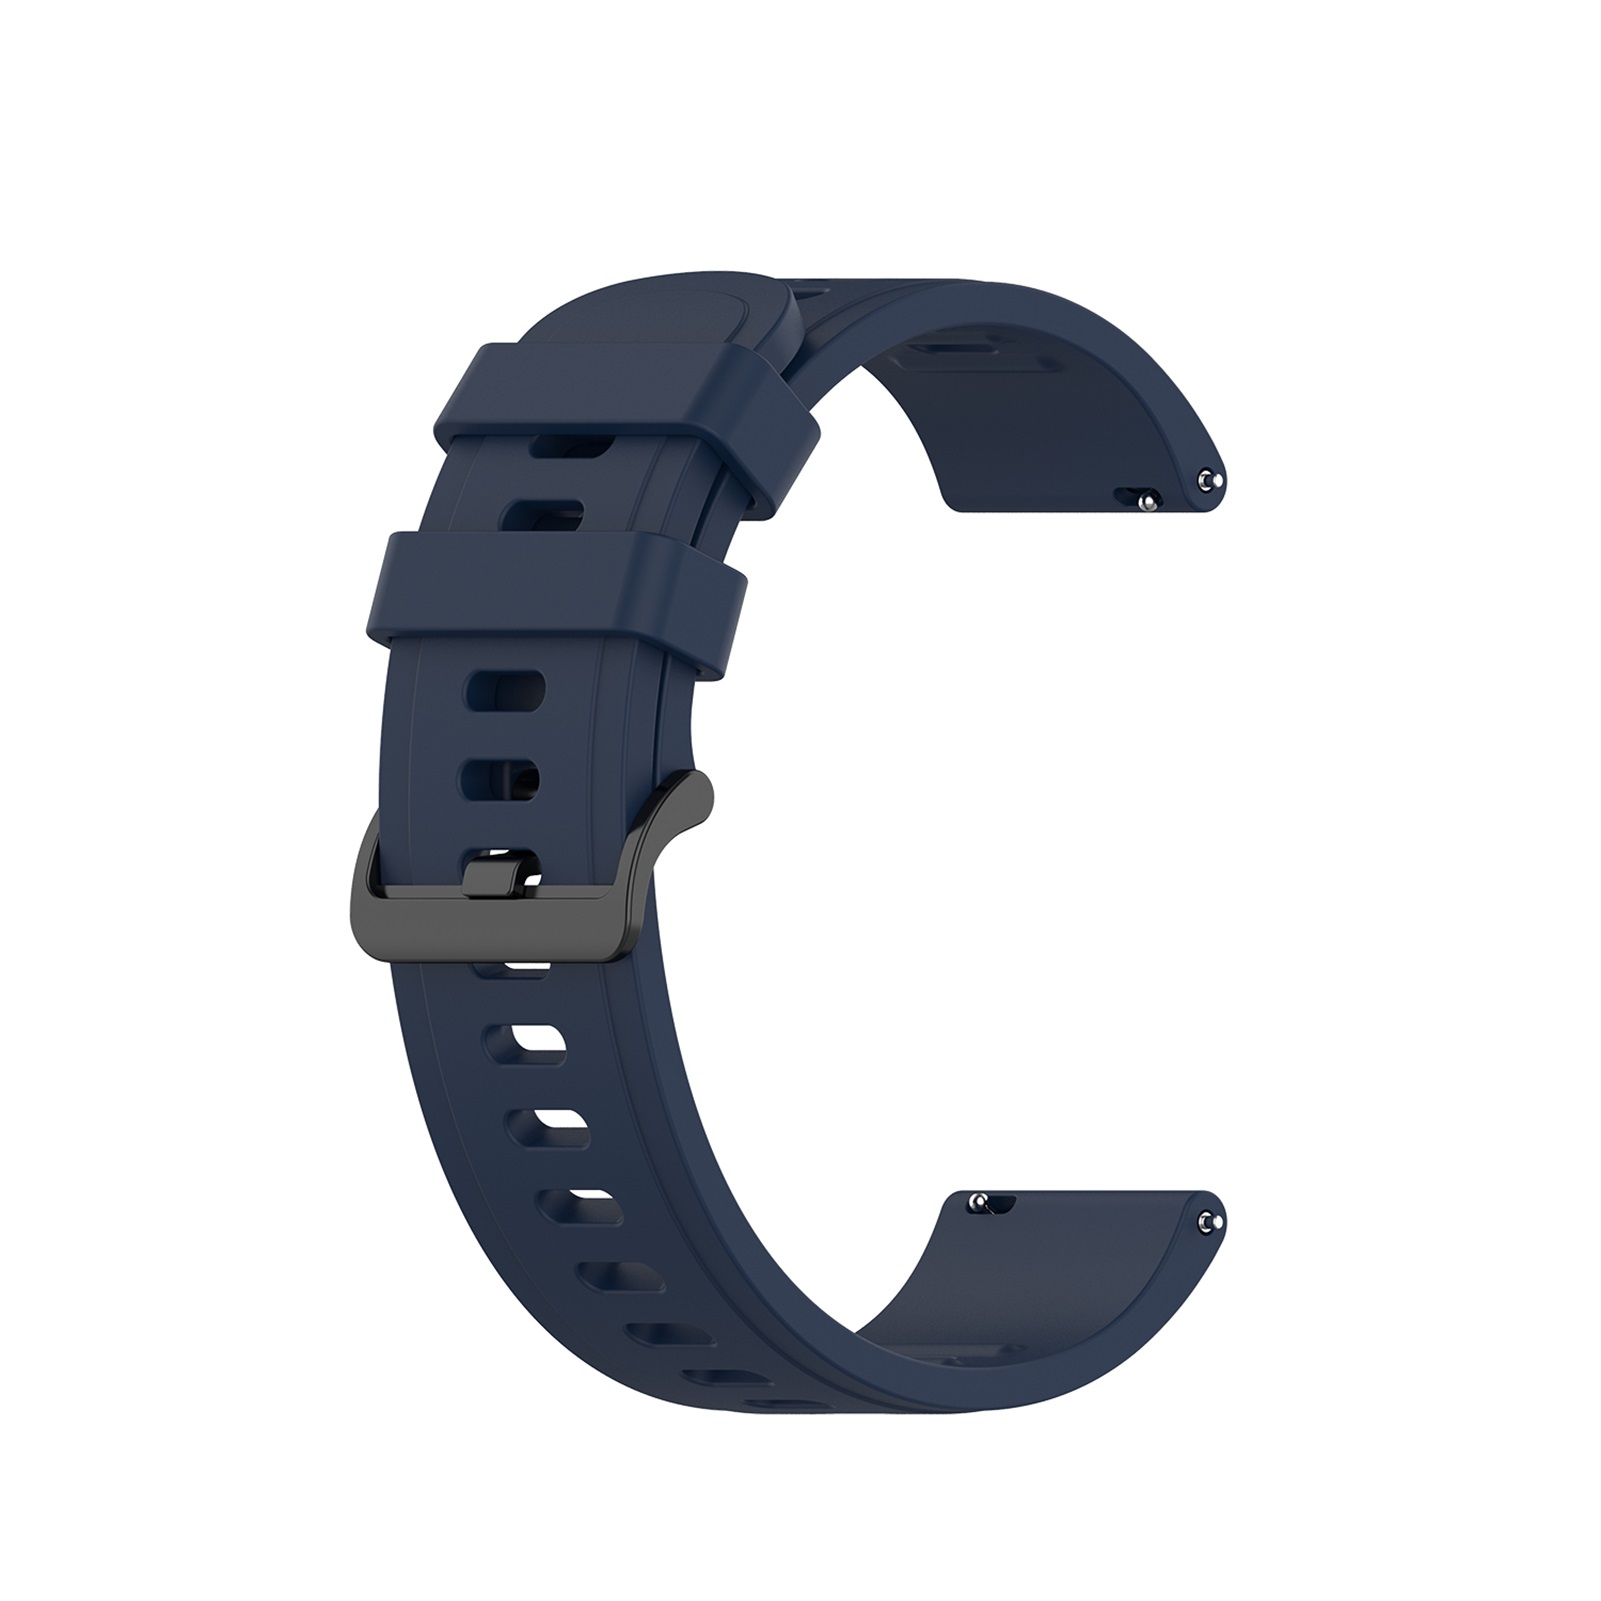 Bakeey-20mm-Multi-color-Silicone-Smart-Watch-Band-Replacement-Strap-For-Zeblaze-GTR--Haylou-LS02-1785338-19